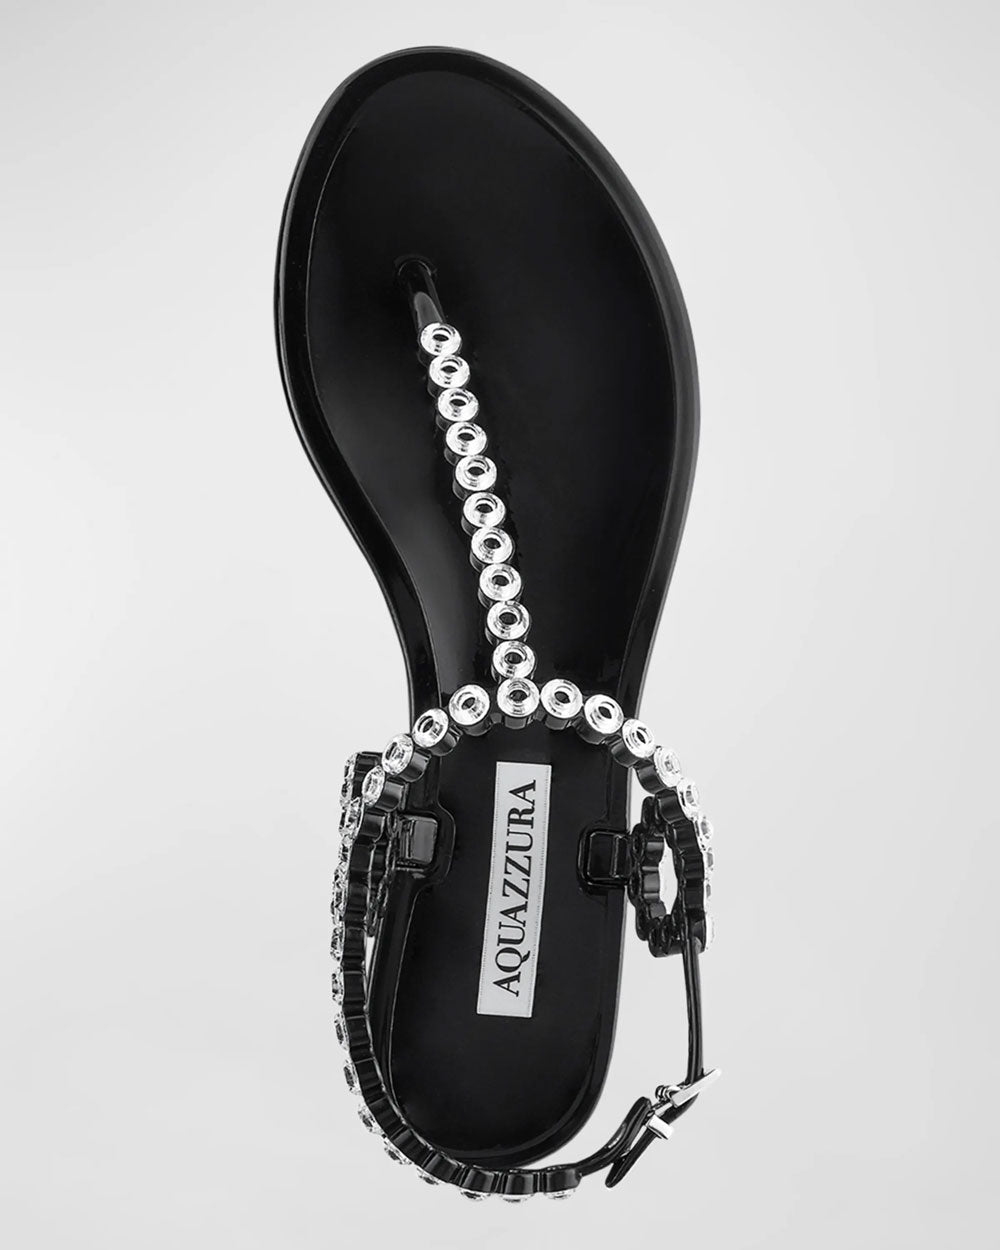 Barely There Crystal Jelly Sandal in Black